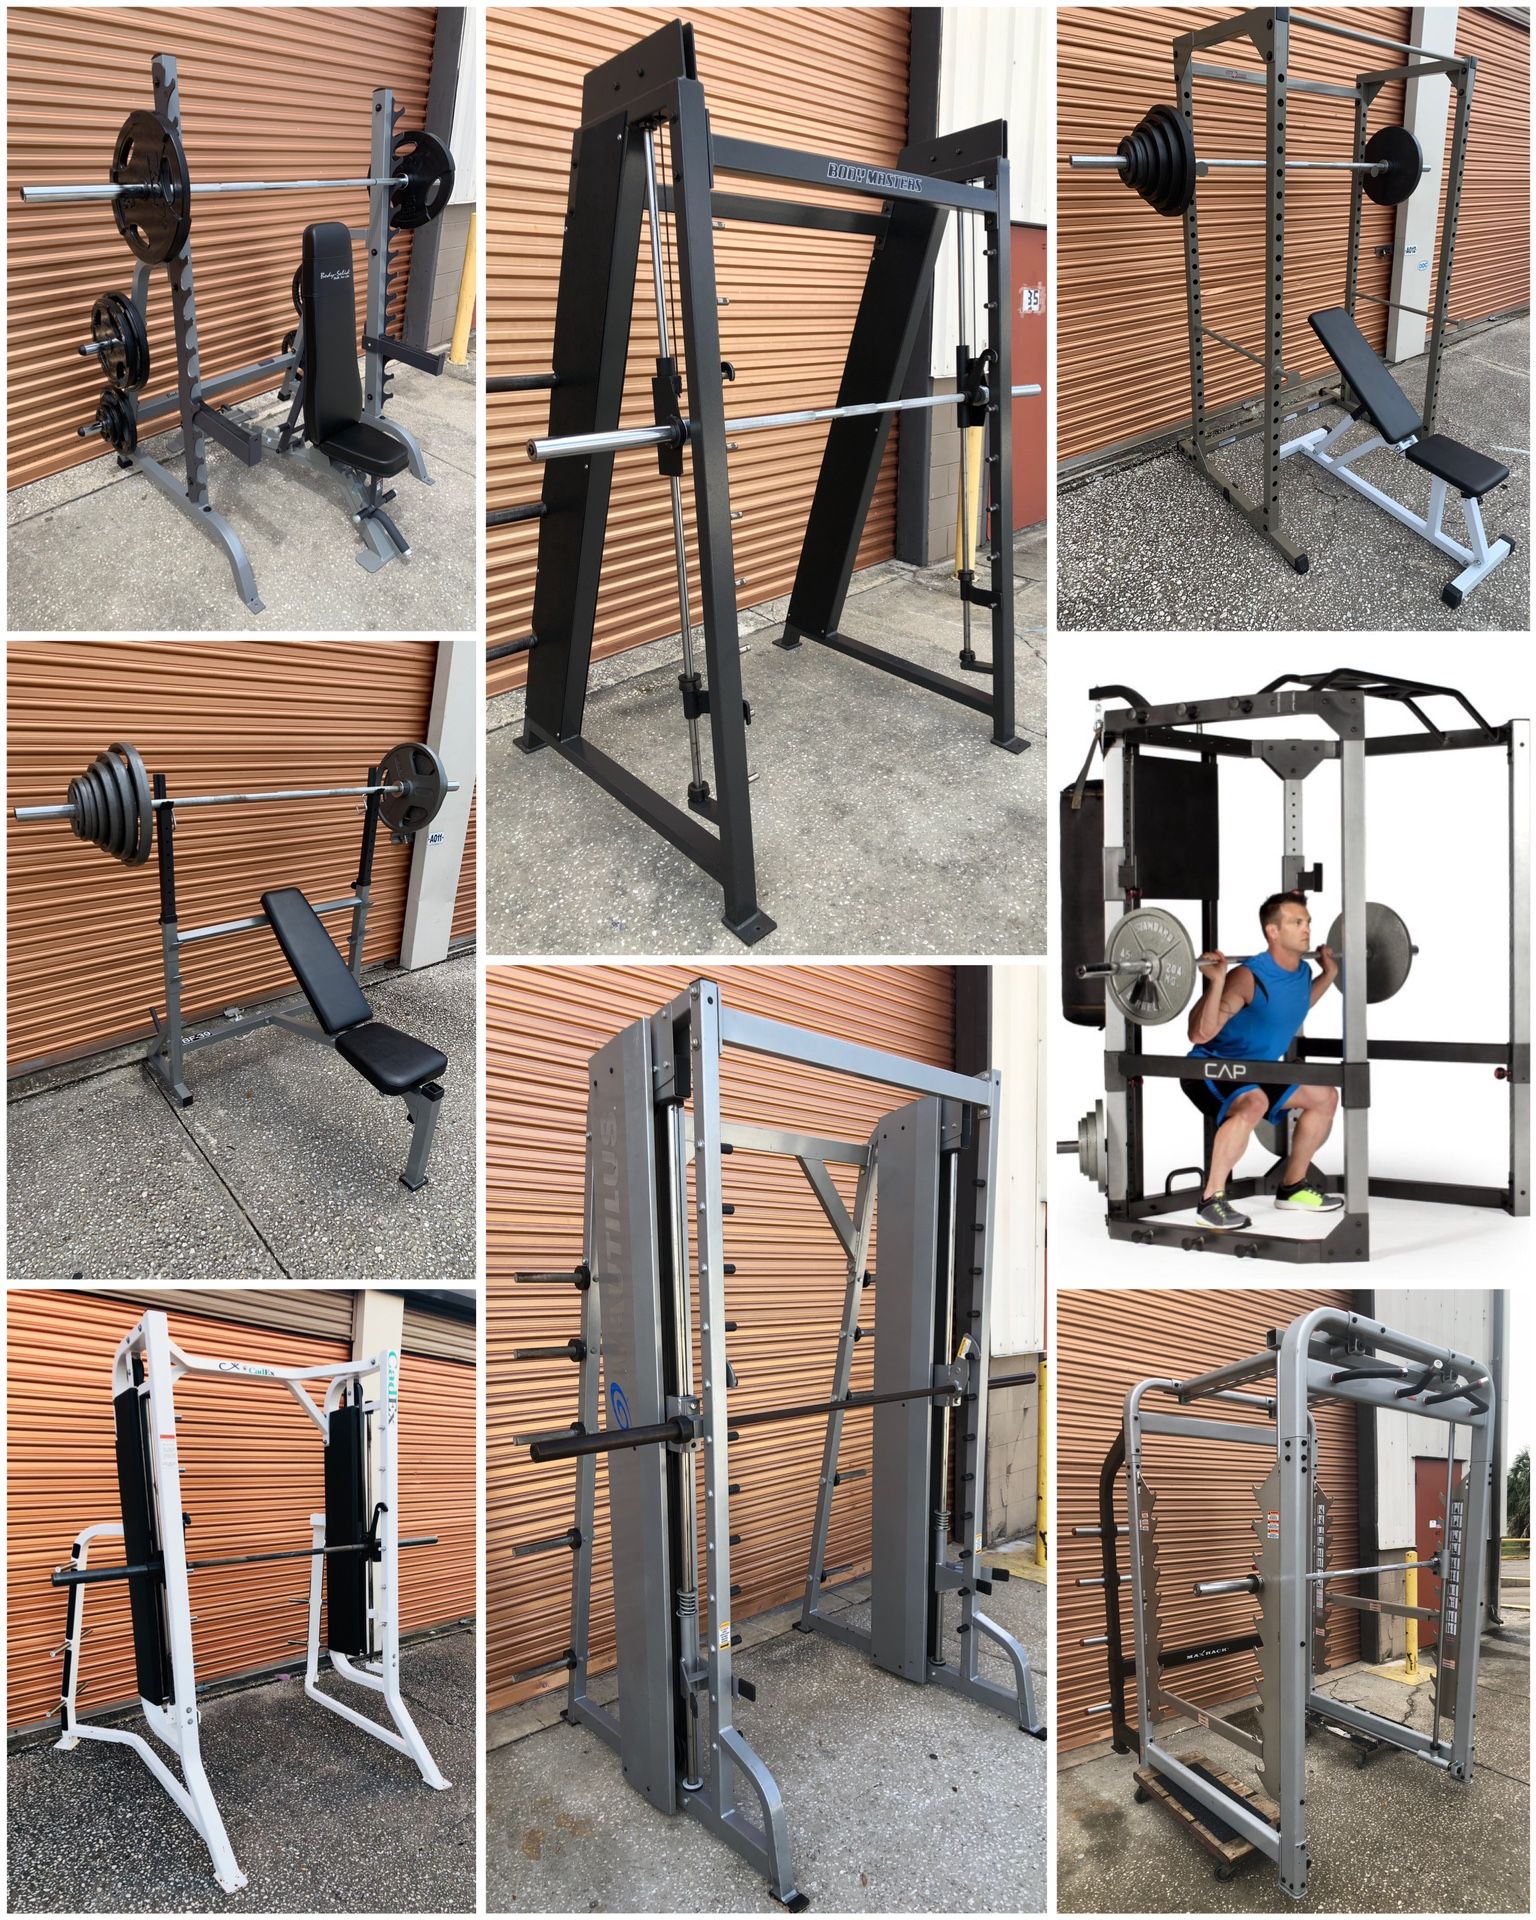 Smith Machines, Weight Benches, Squat/Power Racks, Home Gyms, Cages, Olympic Plates, Dumbbells, Barbells